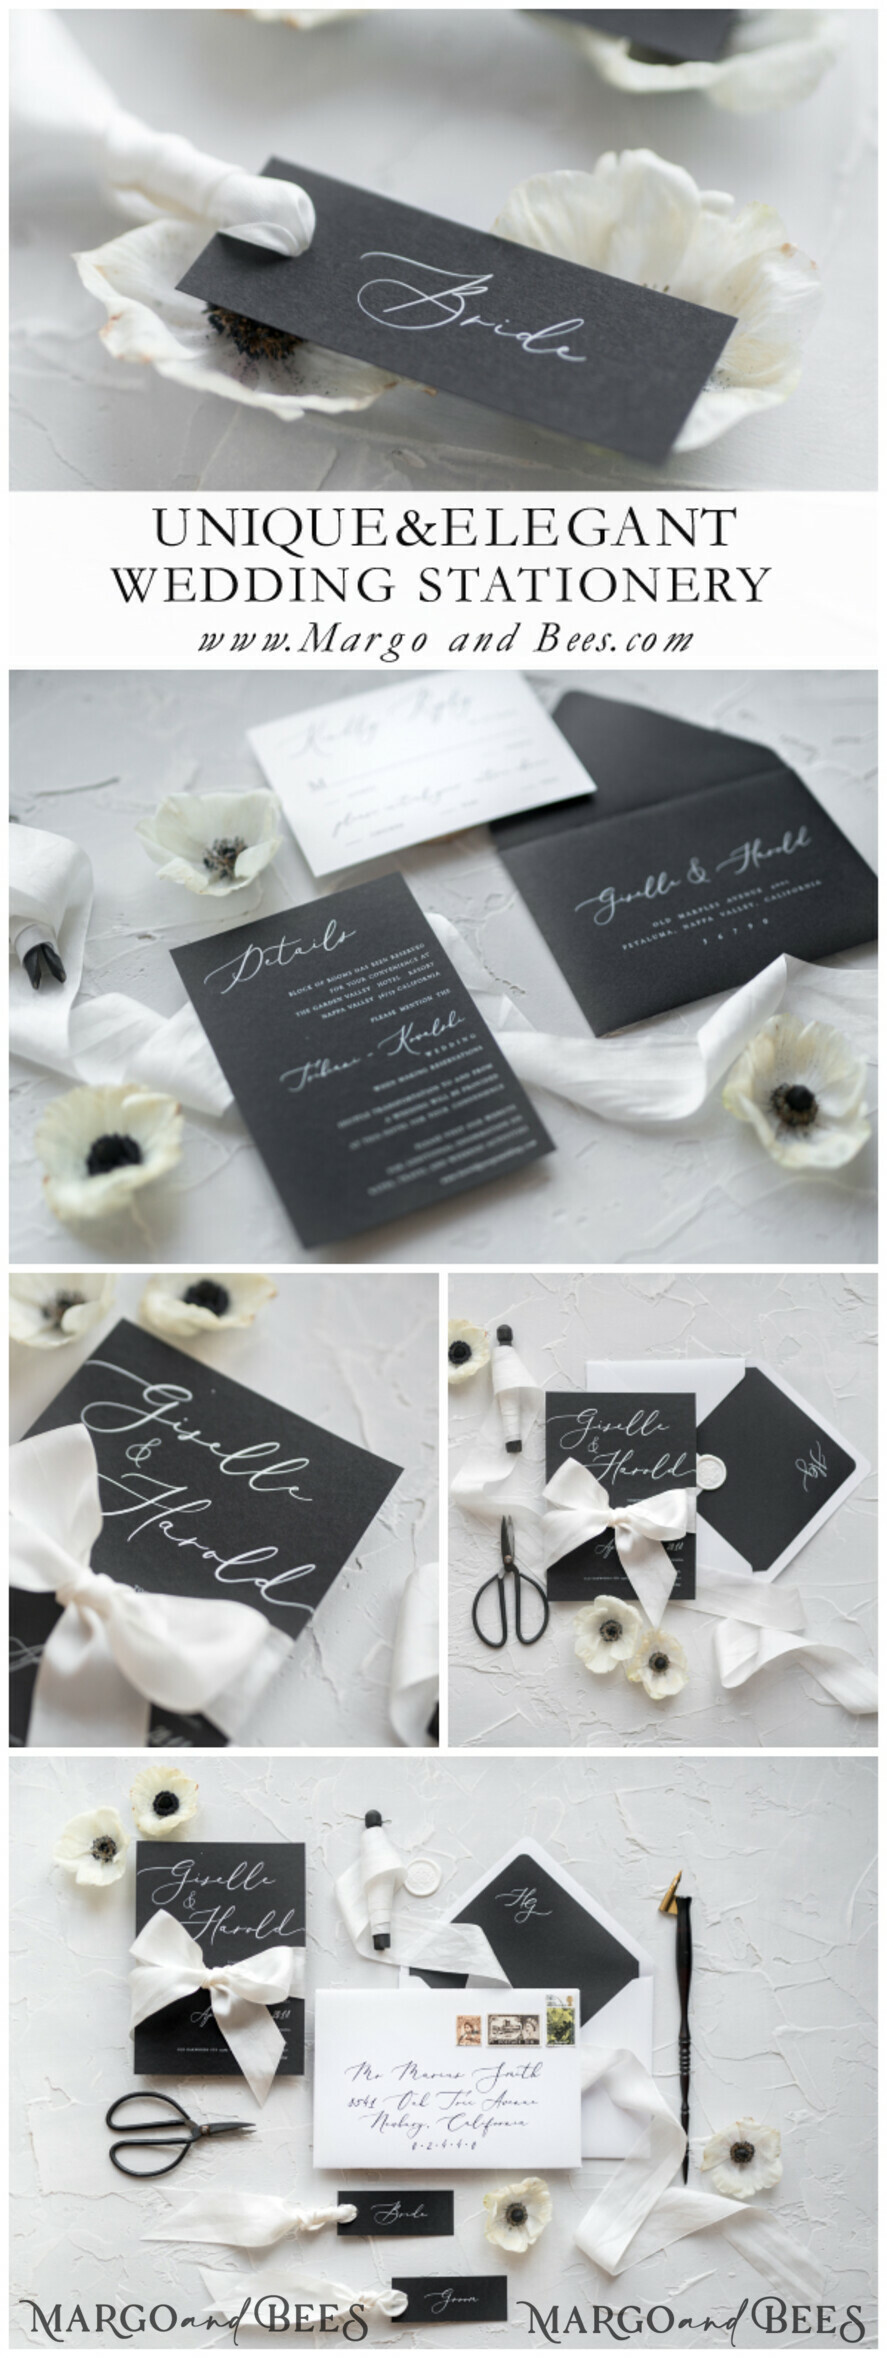 Fancy Linen 5x7 Stationery Card by Yours Truly